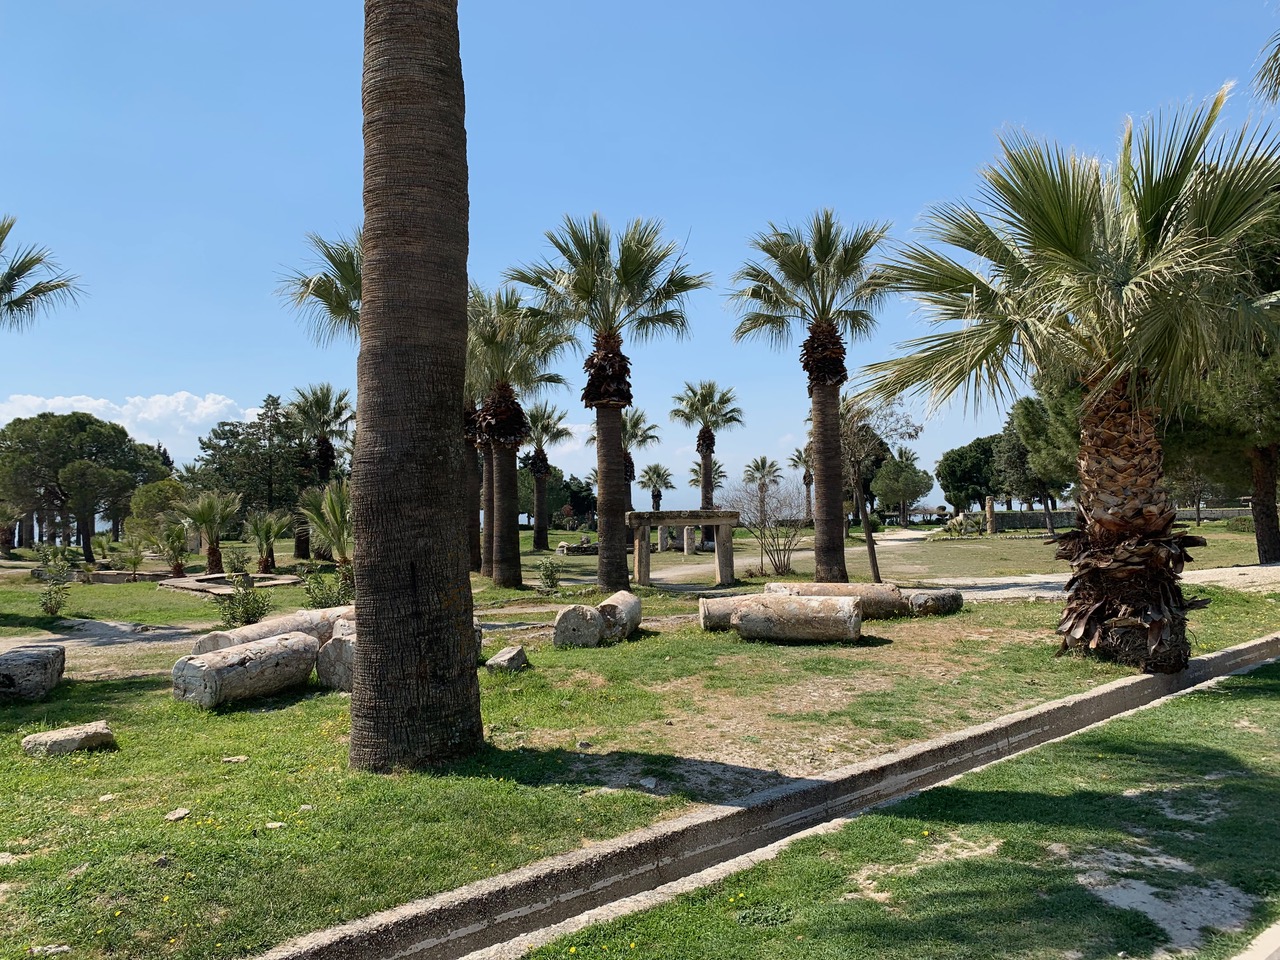 Palms trees with the remnants of columns lying among them